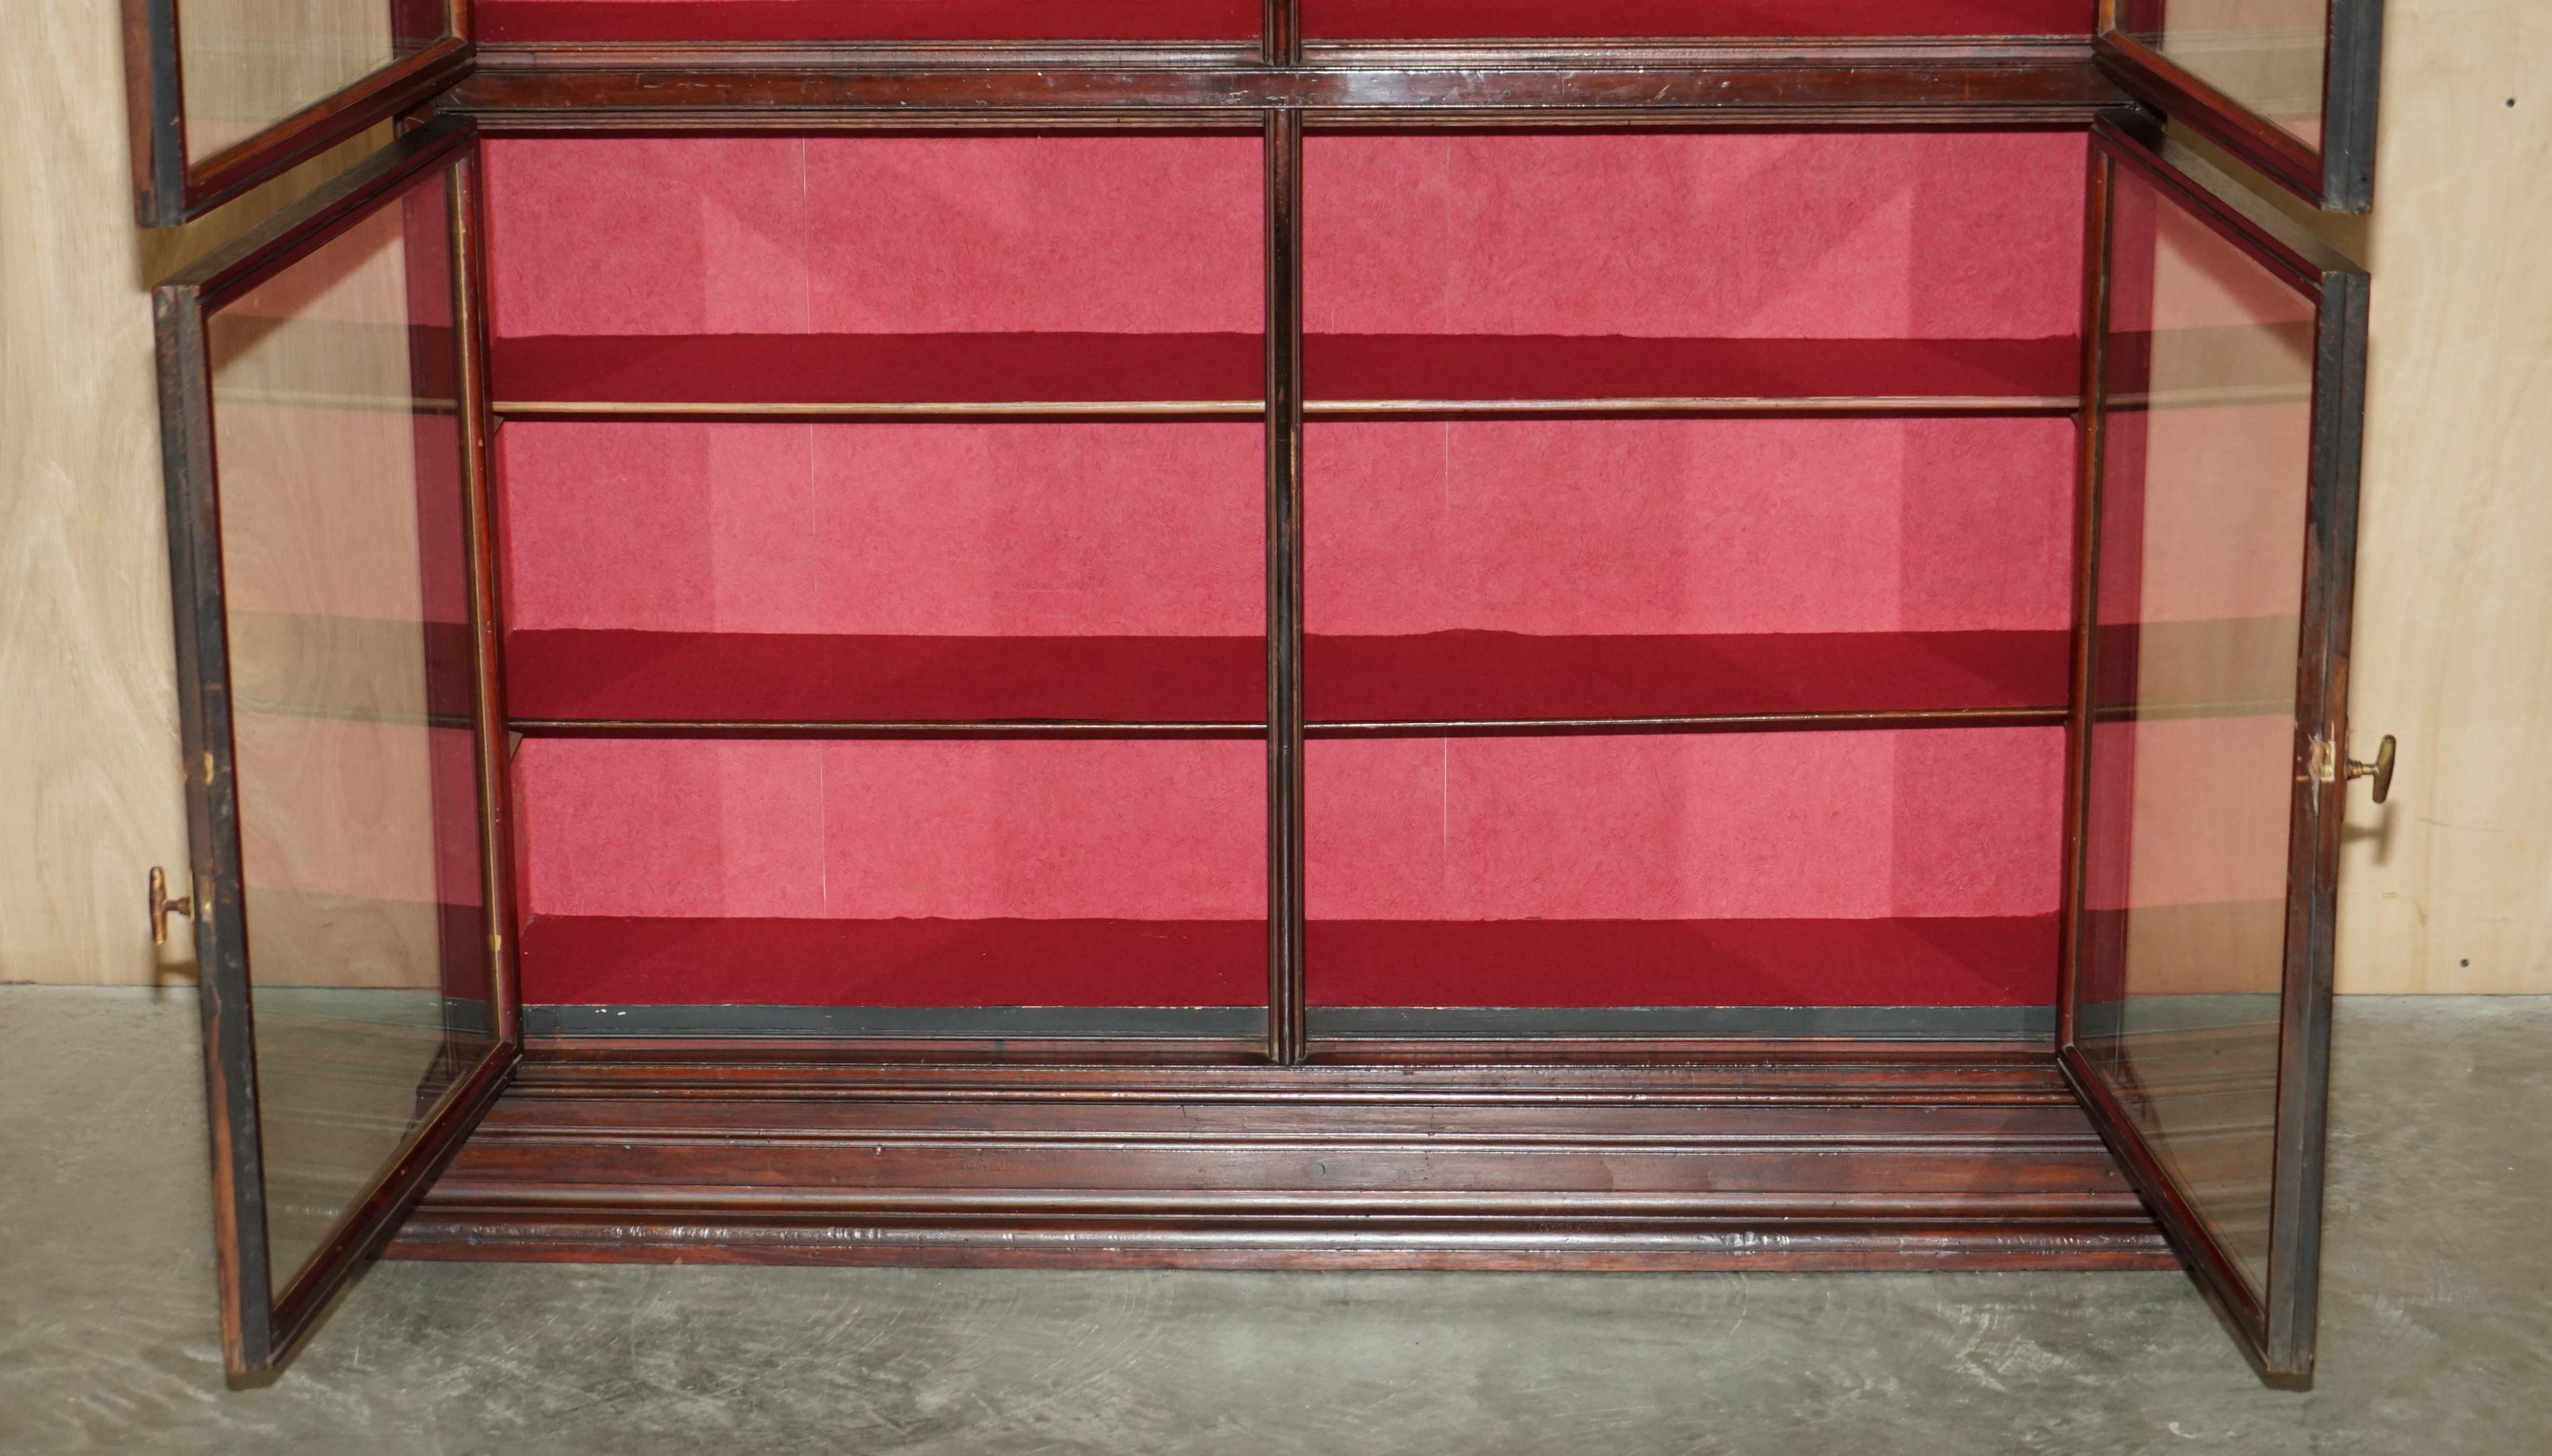 LARGE VICTORIAN HABERDASHERY APOTHECARY SHOPS CABiNET GLAZED DOOR BOOKCASE For Sale 5